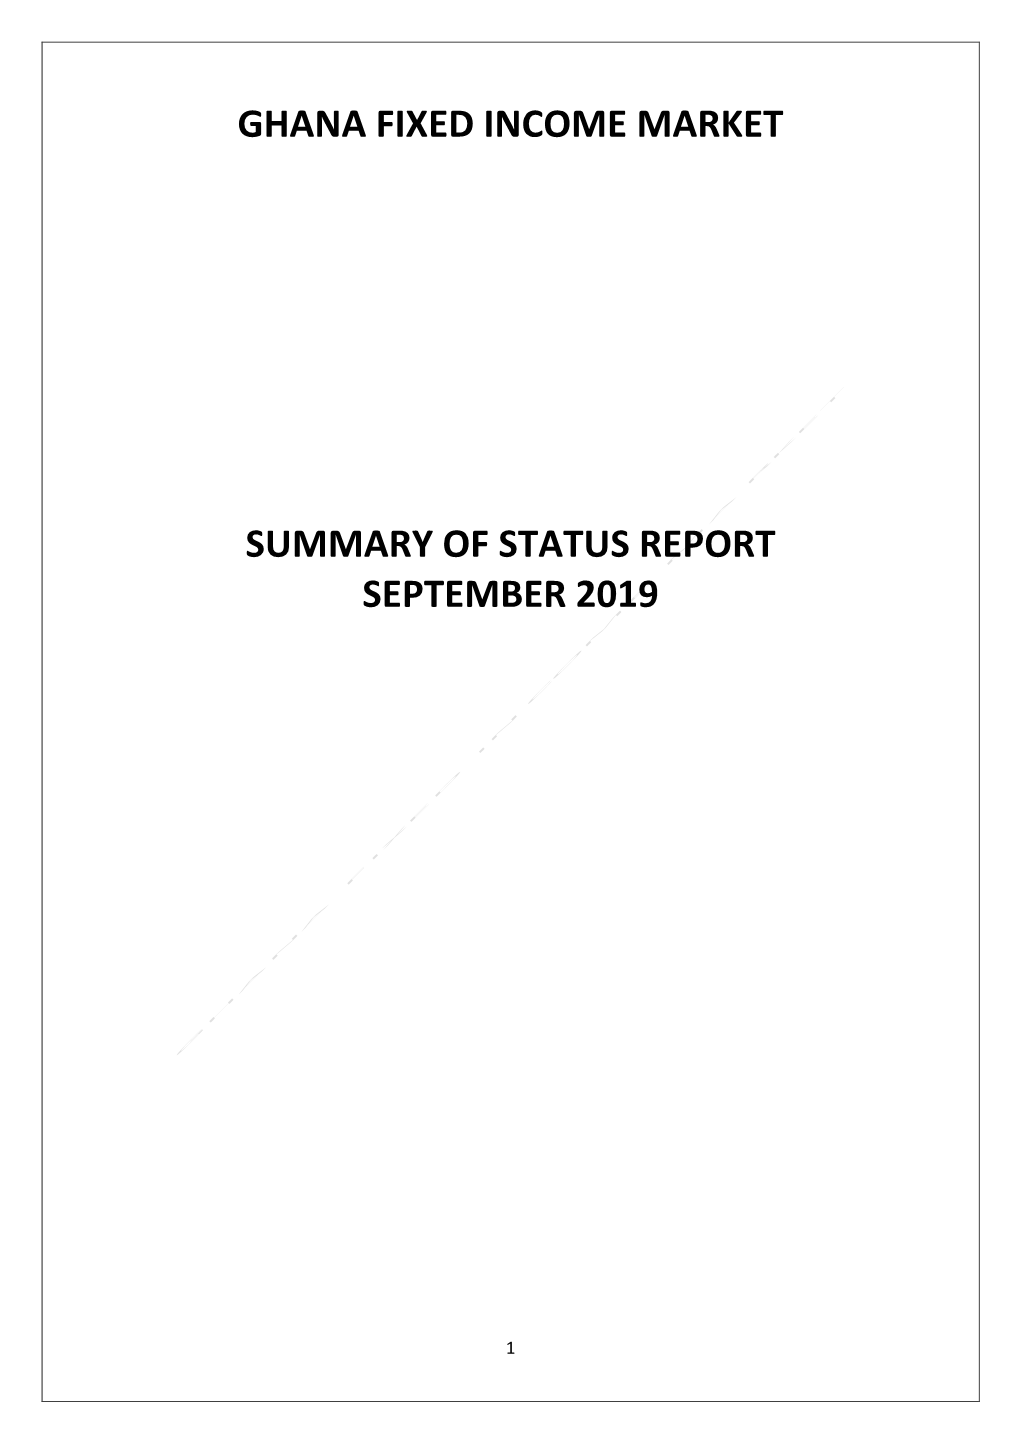 Ghana Fixed Income Market Summary of Status Report